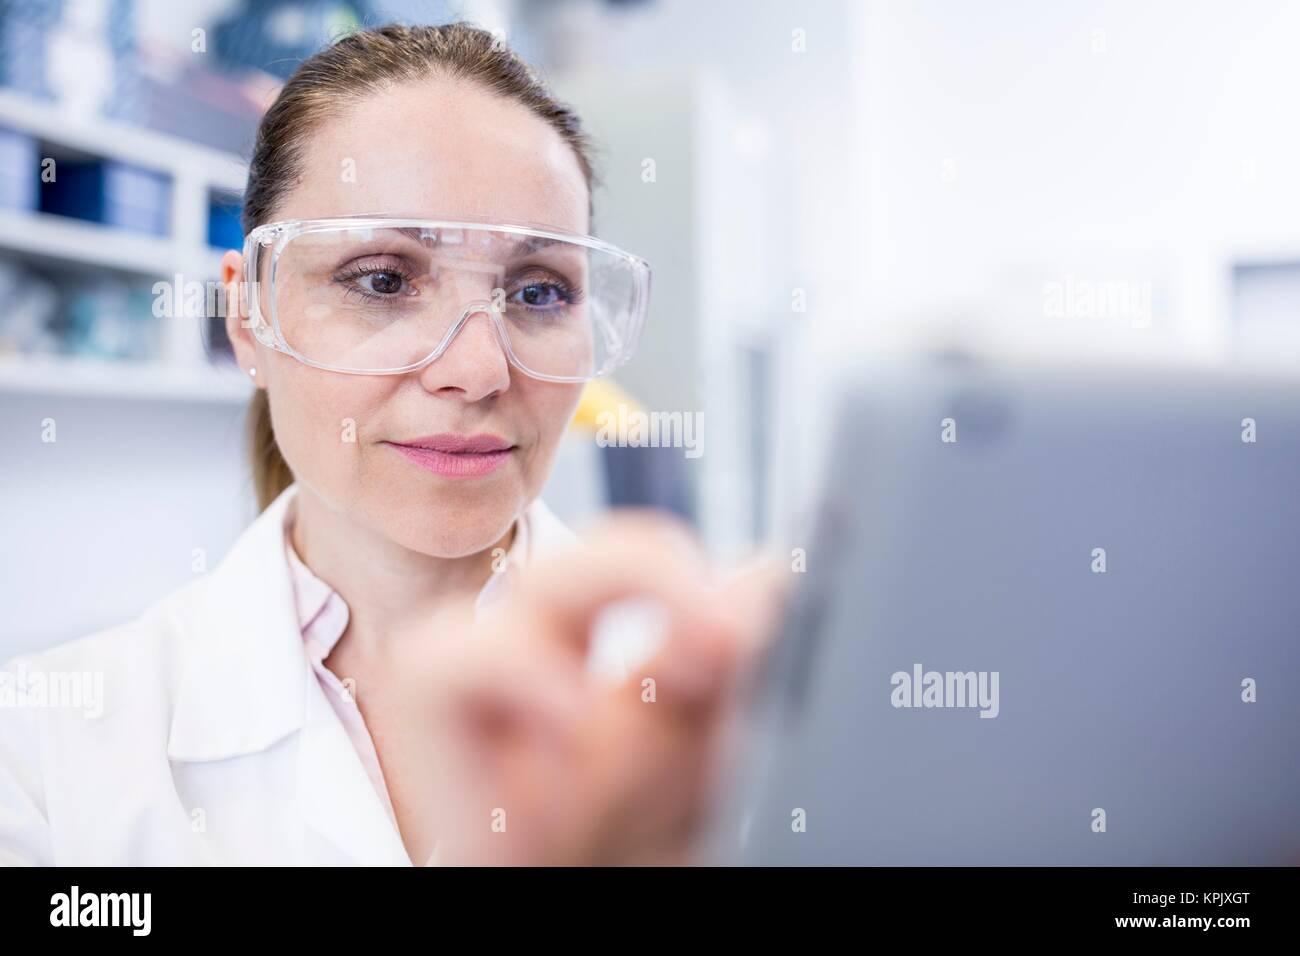 Female laboratory assistant using tablet. Stock Photo